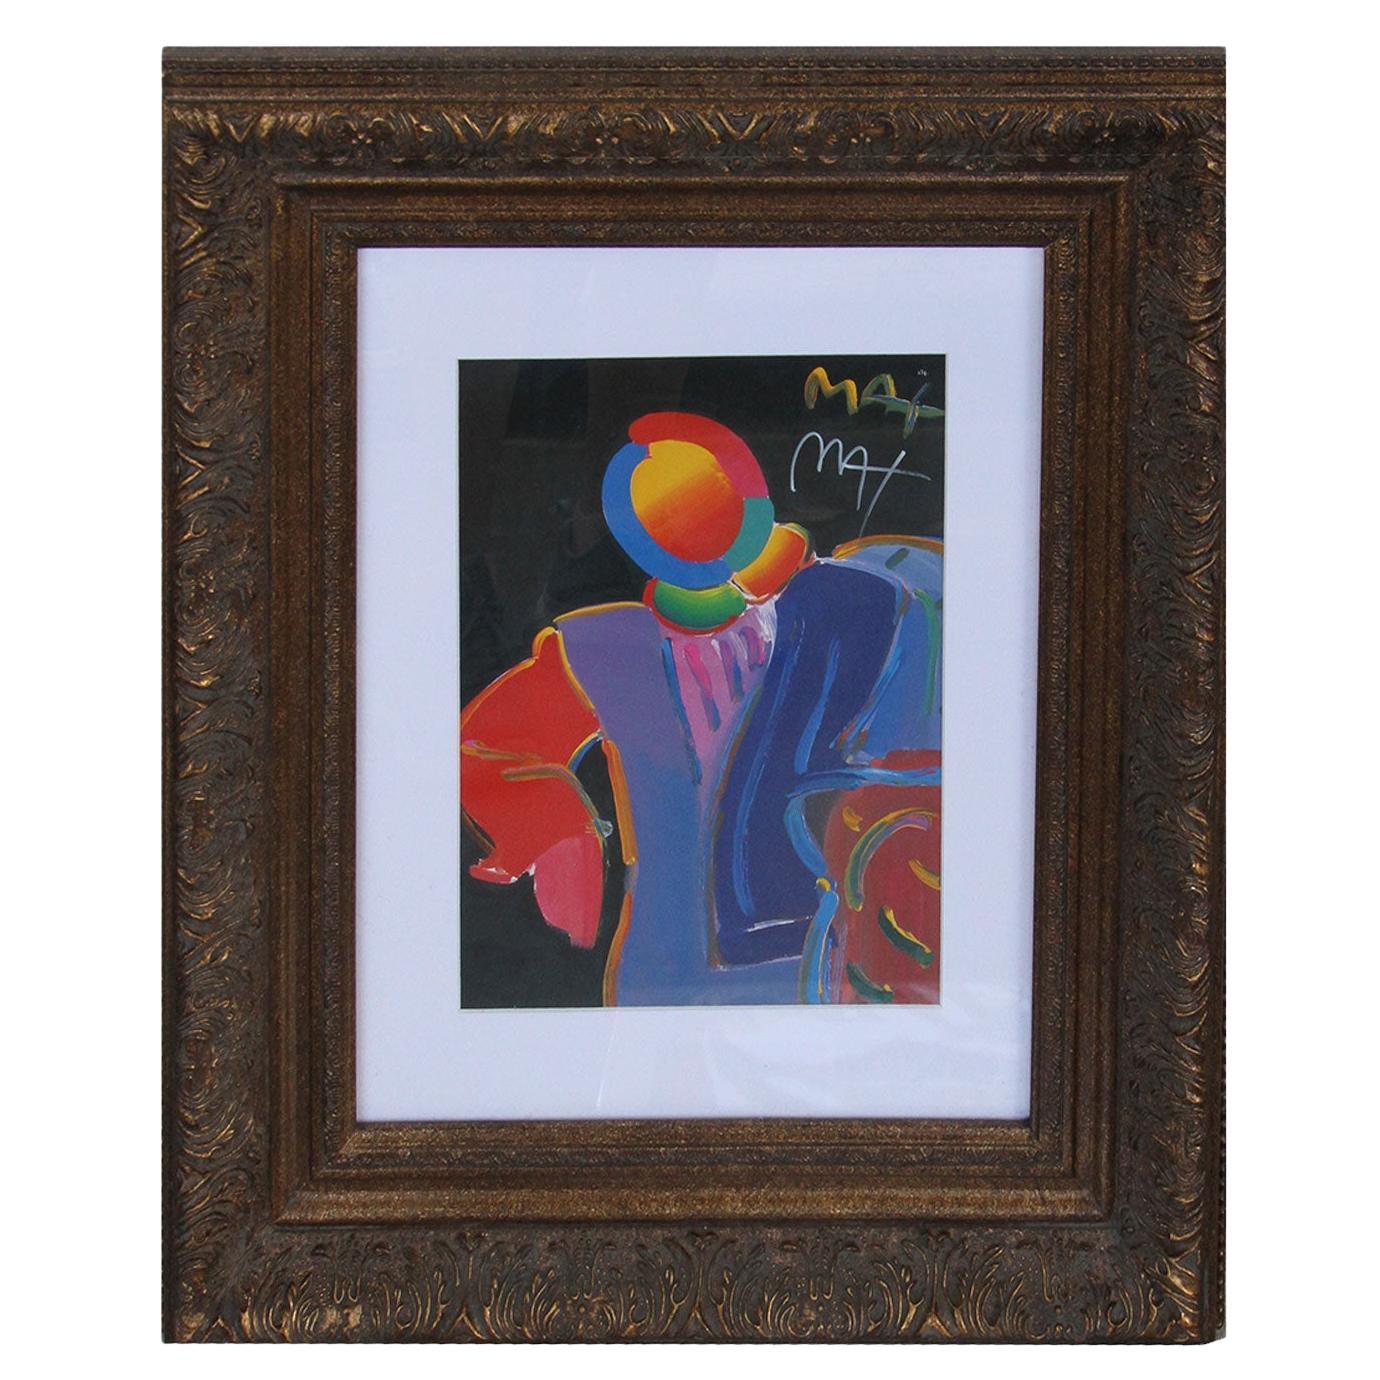 Limited Edition Print by Peter Max "Dega Man"